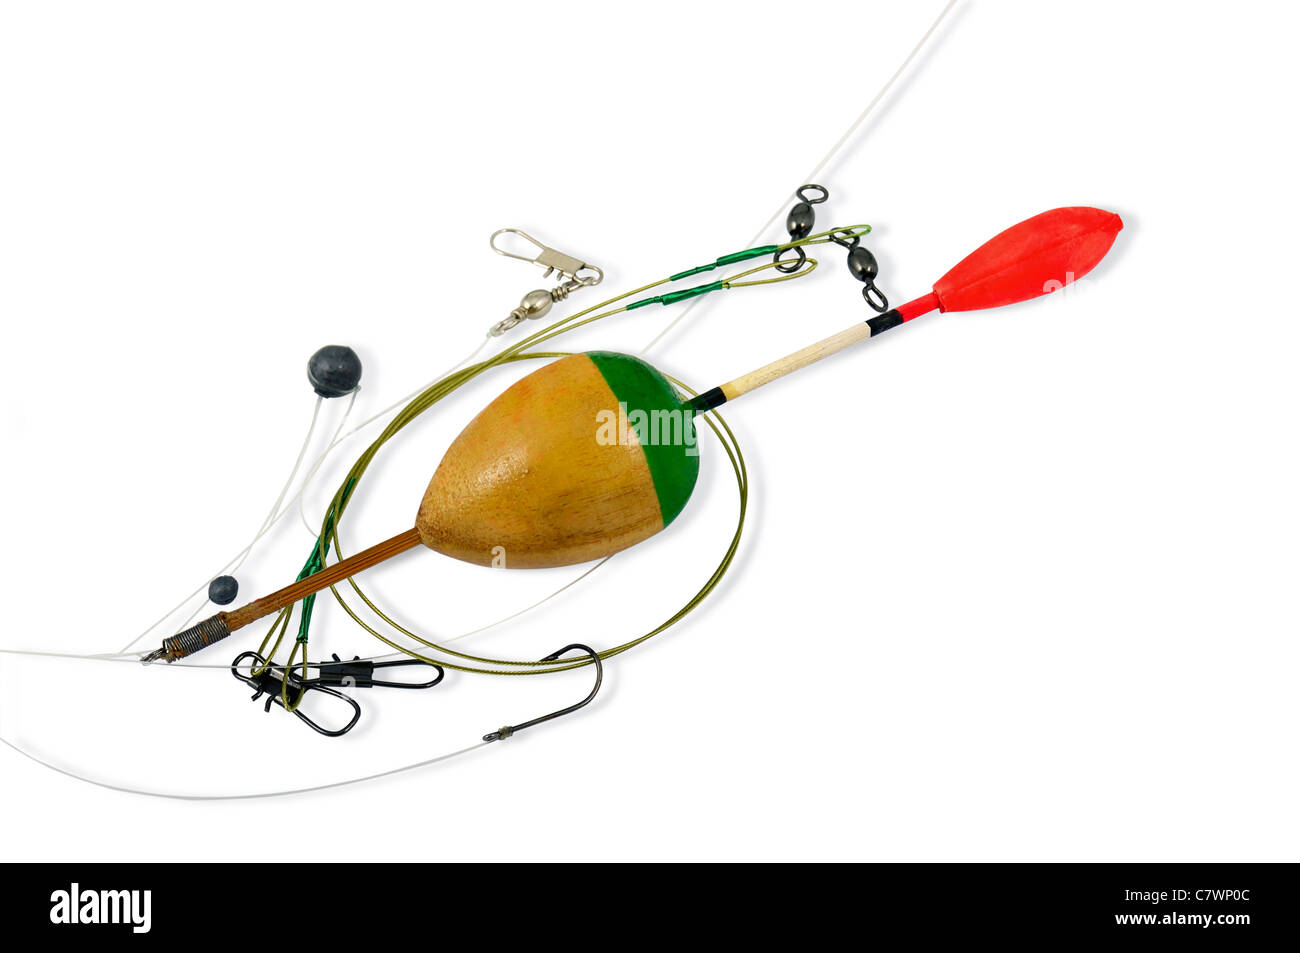 Fishing Tackle Float Fishing Line Sinker And Fishing Hooks On Old Wooden  Boards Stock Photo - Download Image Now - iStock